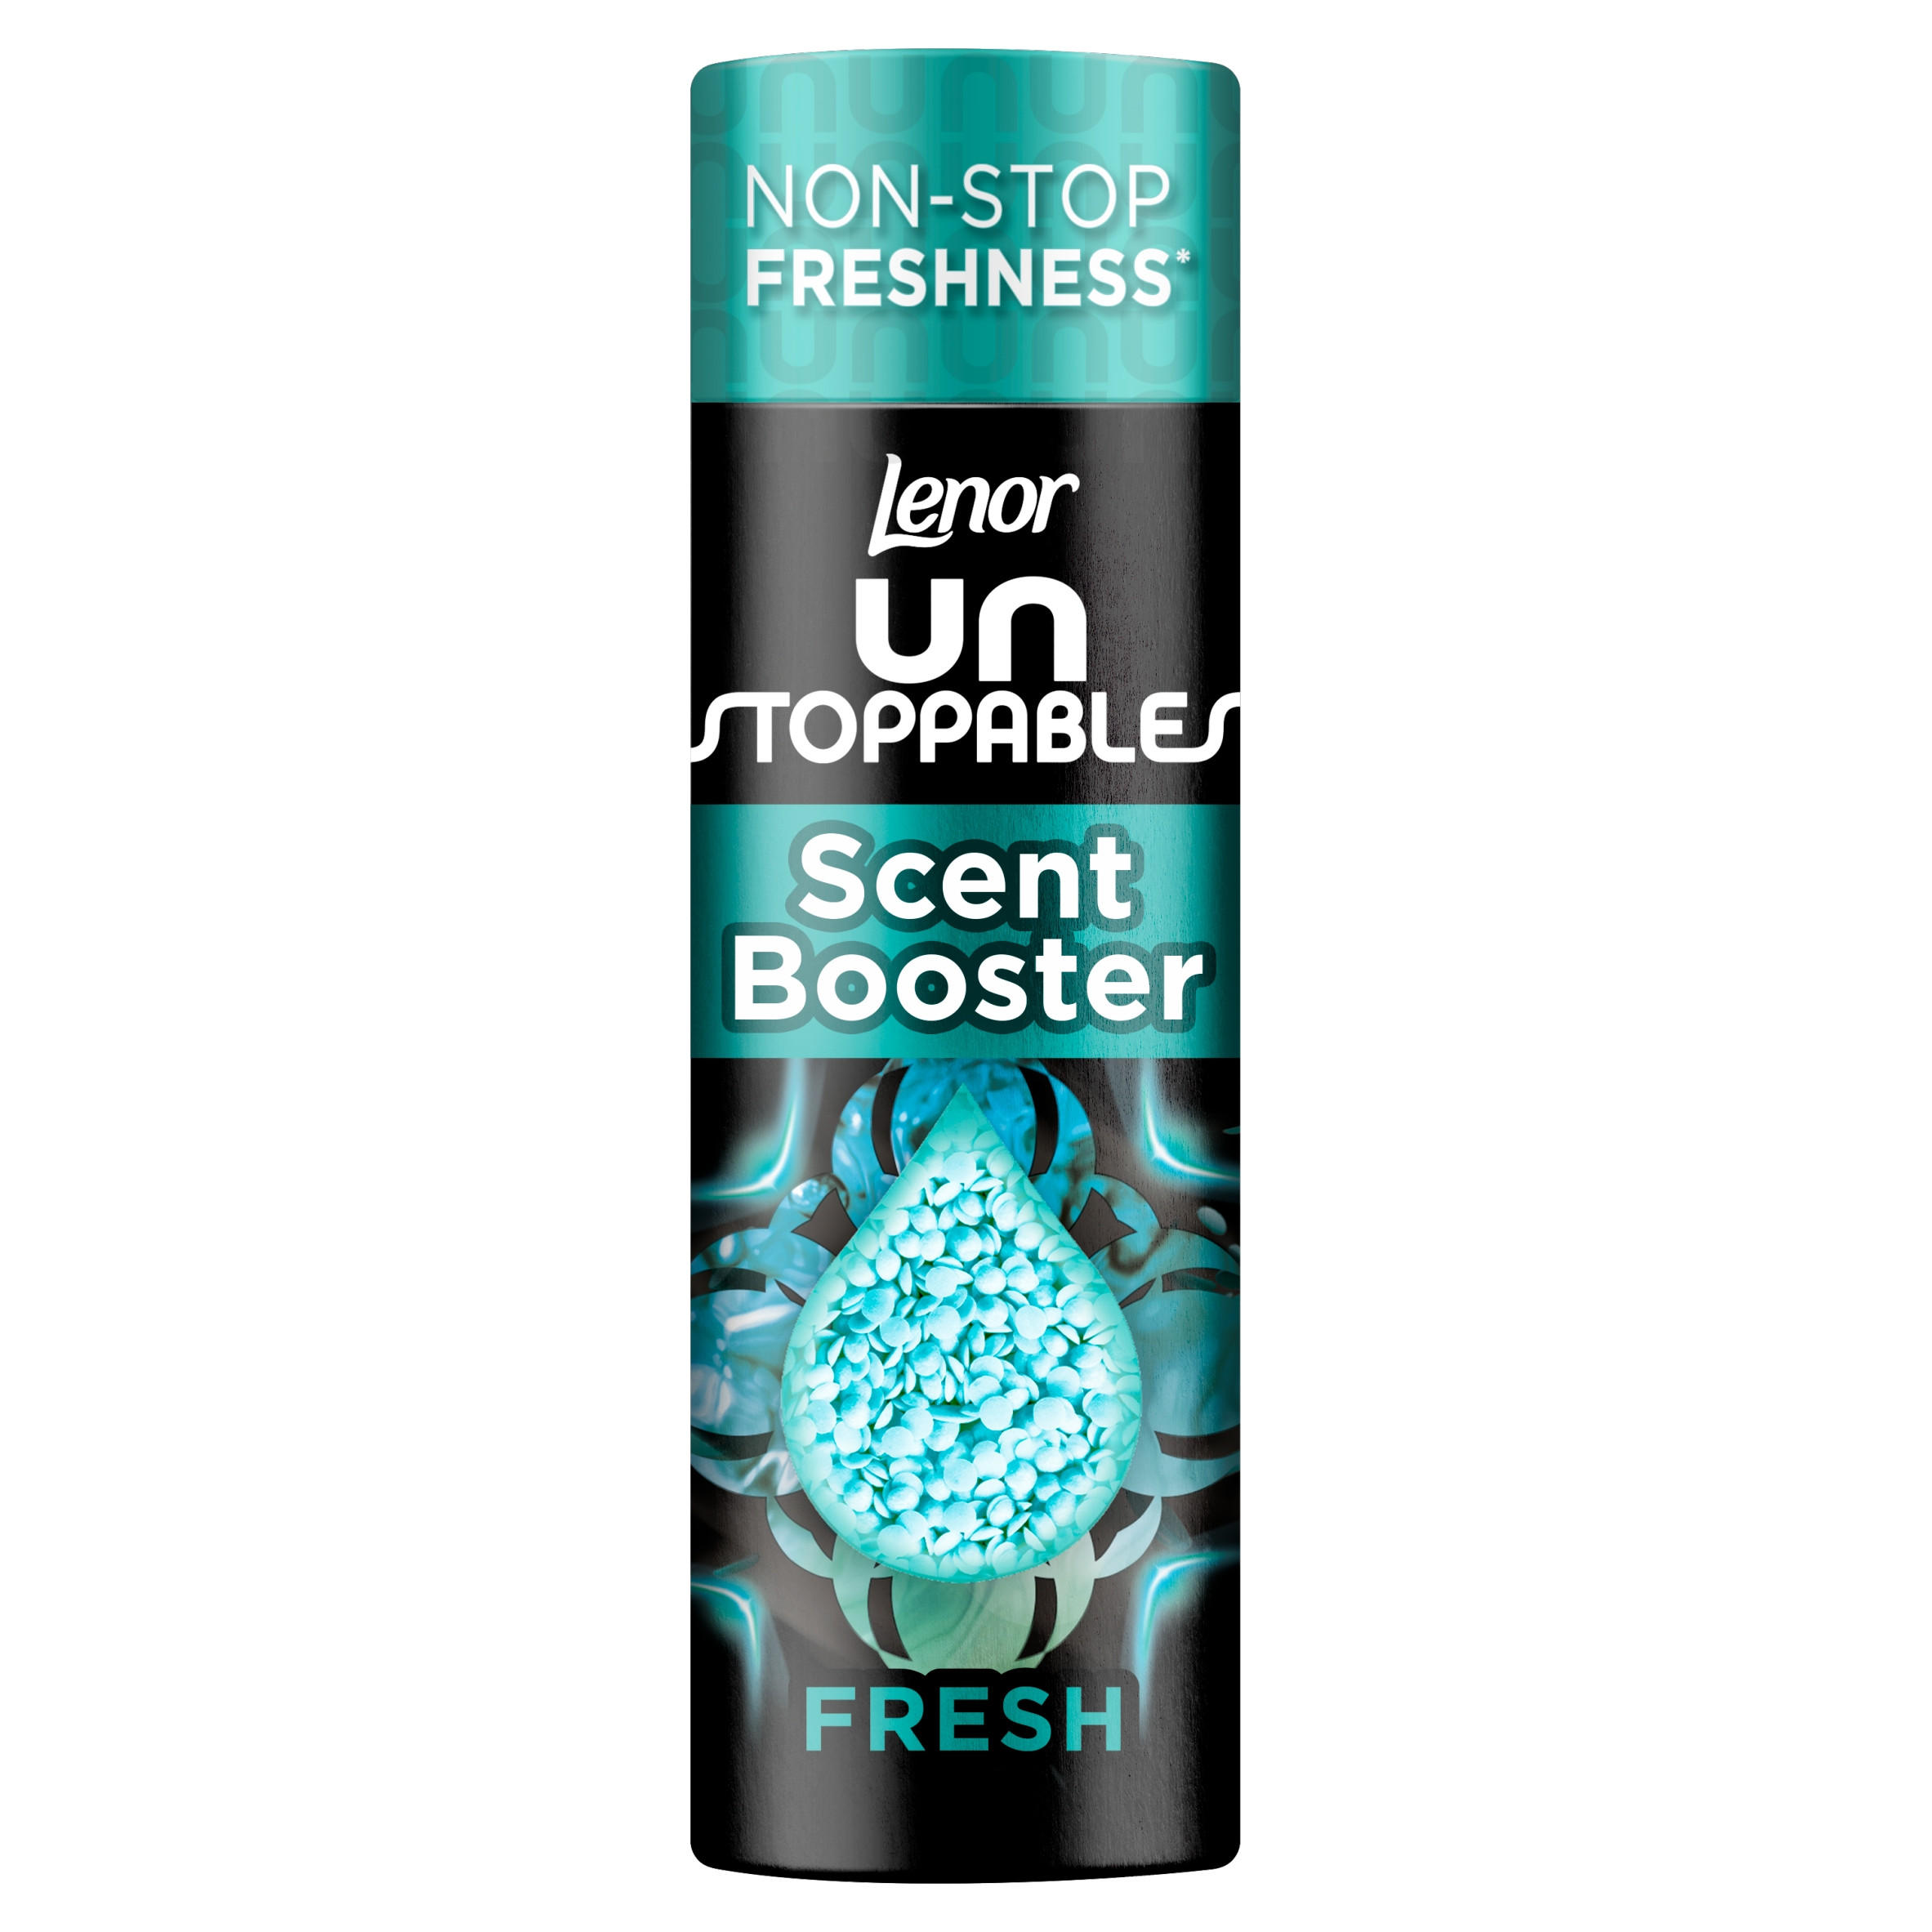 LENOR Unstoppables in-Wash Laundry Scent Booster India